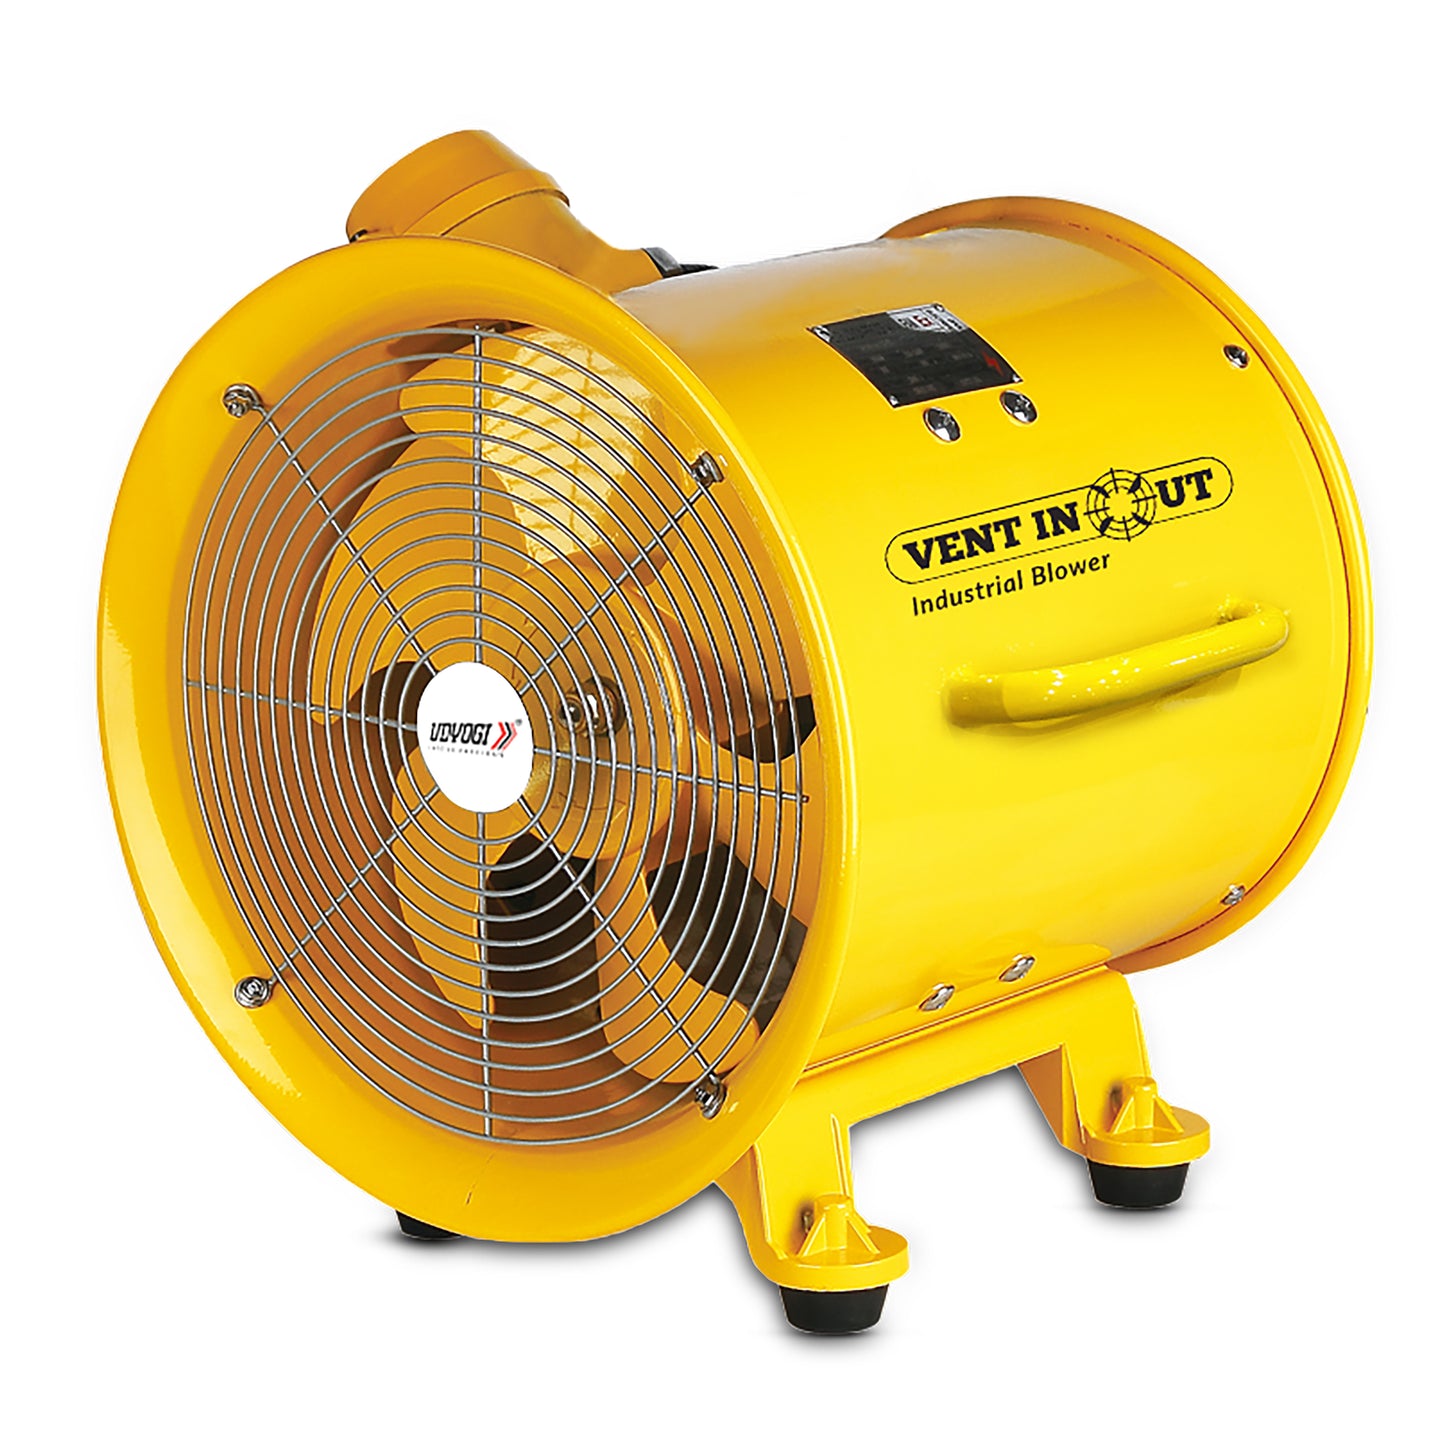 Udyogi Industrial Blower 16'' Vent in out BTF 40 400mm